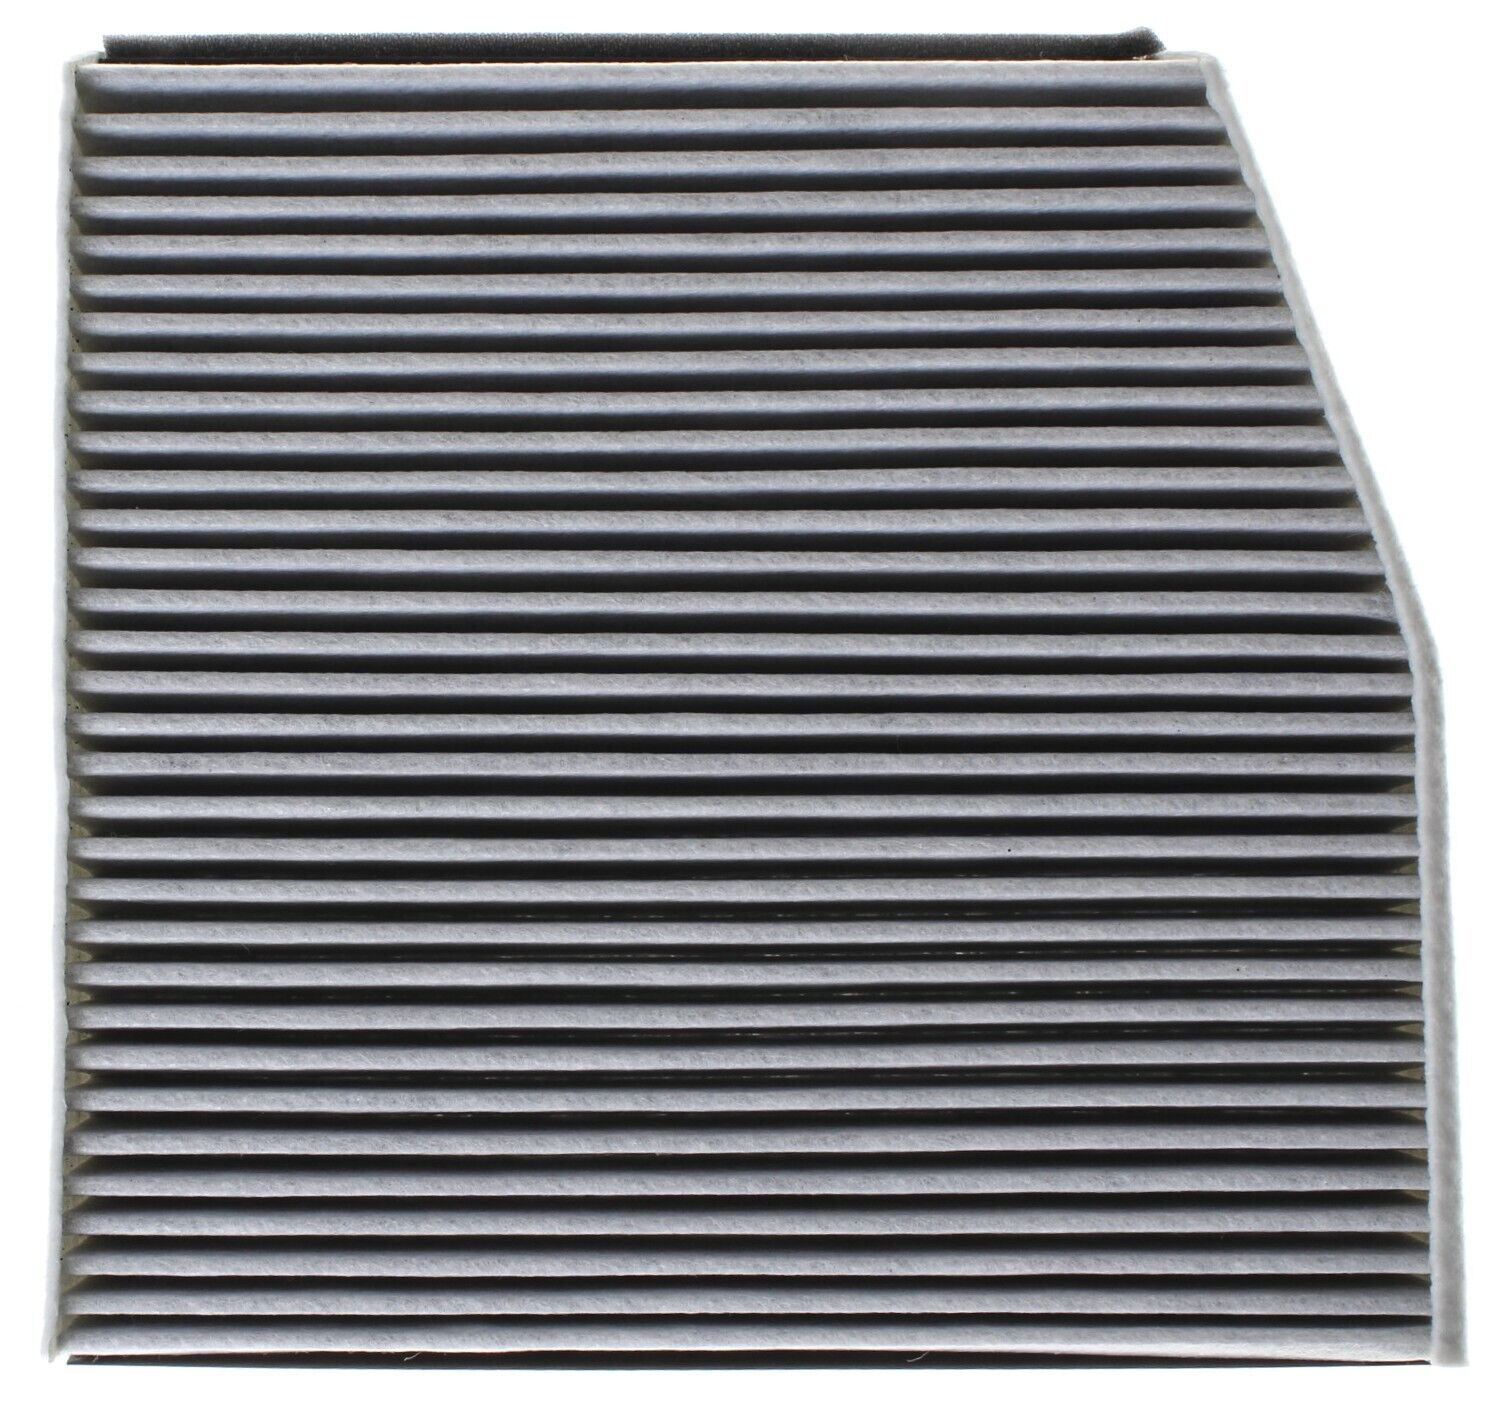 Mahle LAK 879 Mahle Original Filters Are Constructed Using A Superior Embossed 